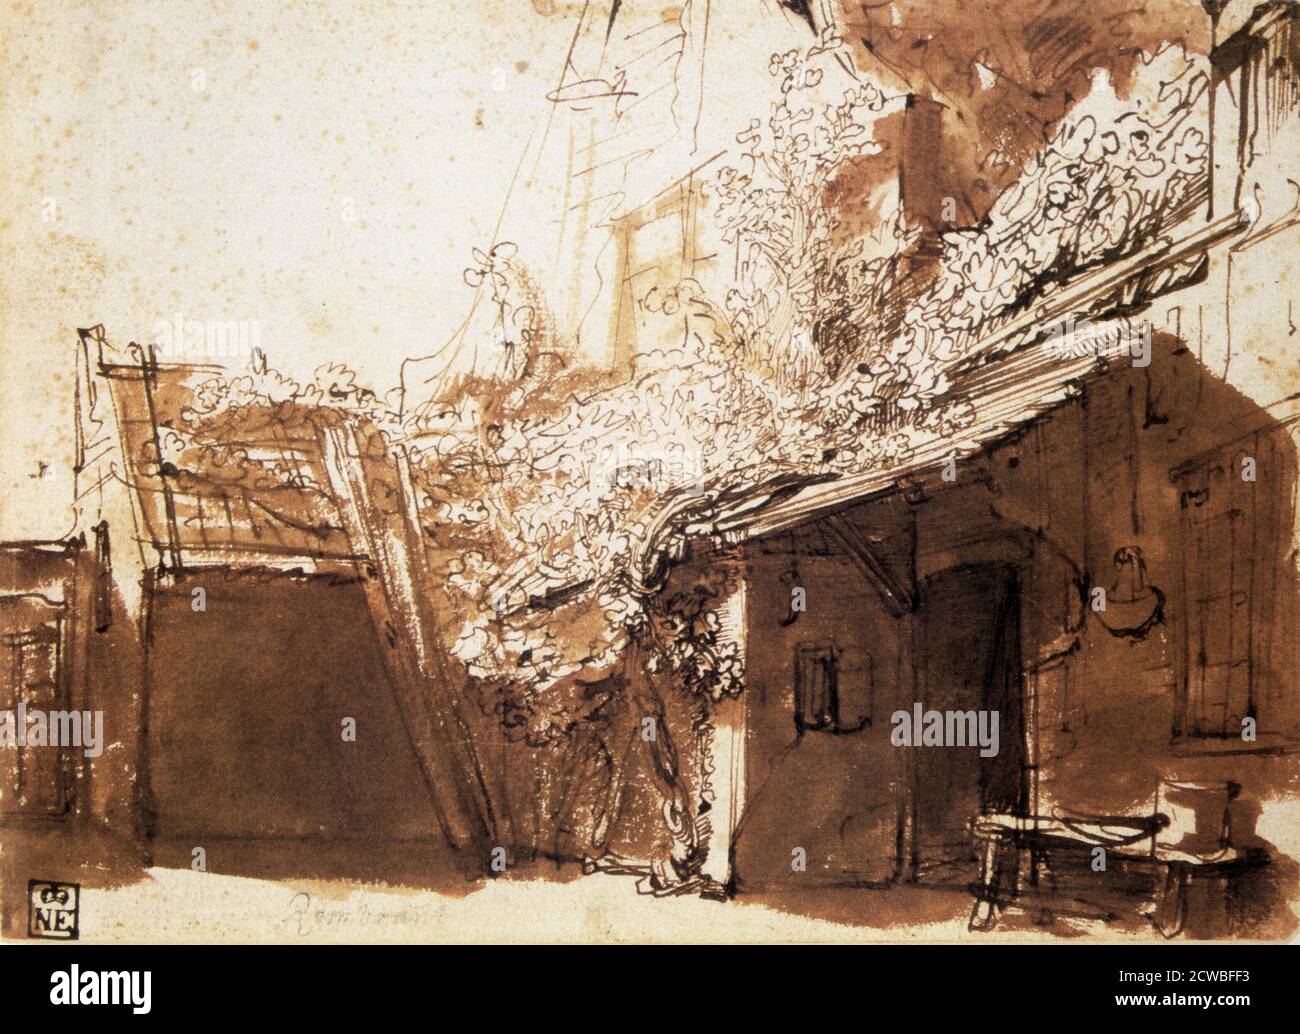 Dutch Peasant House', 17th century, by Rembrandt Harmensz van Rijn. From the Museum of Fine Art, Budapest. Stock Photo